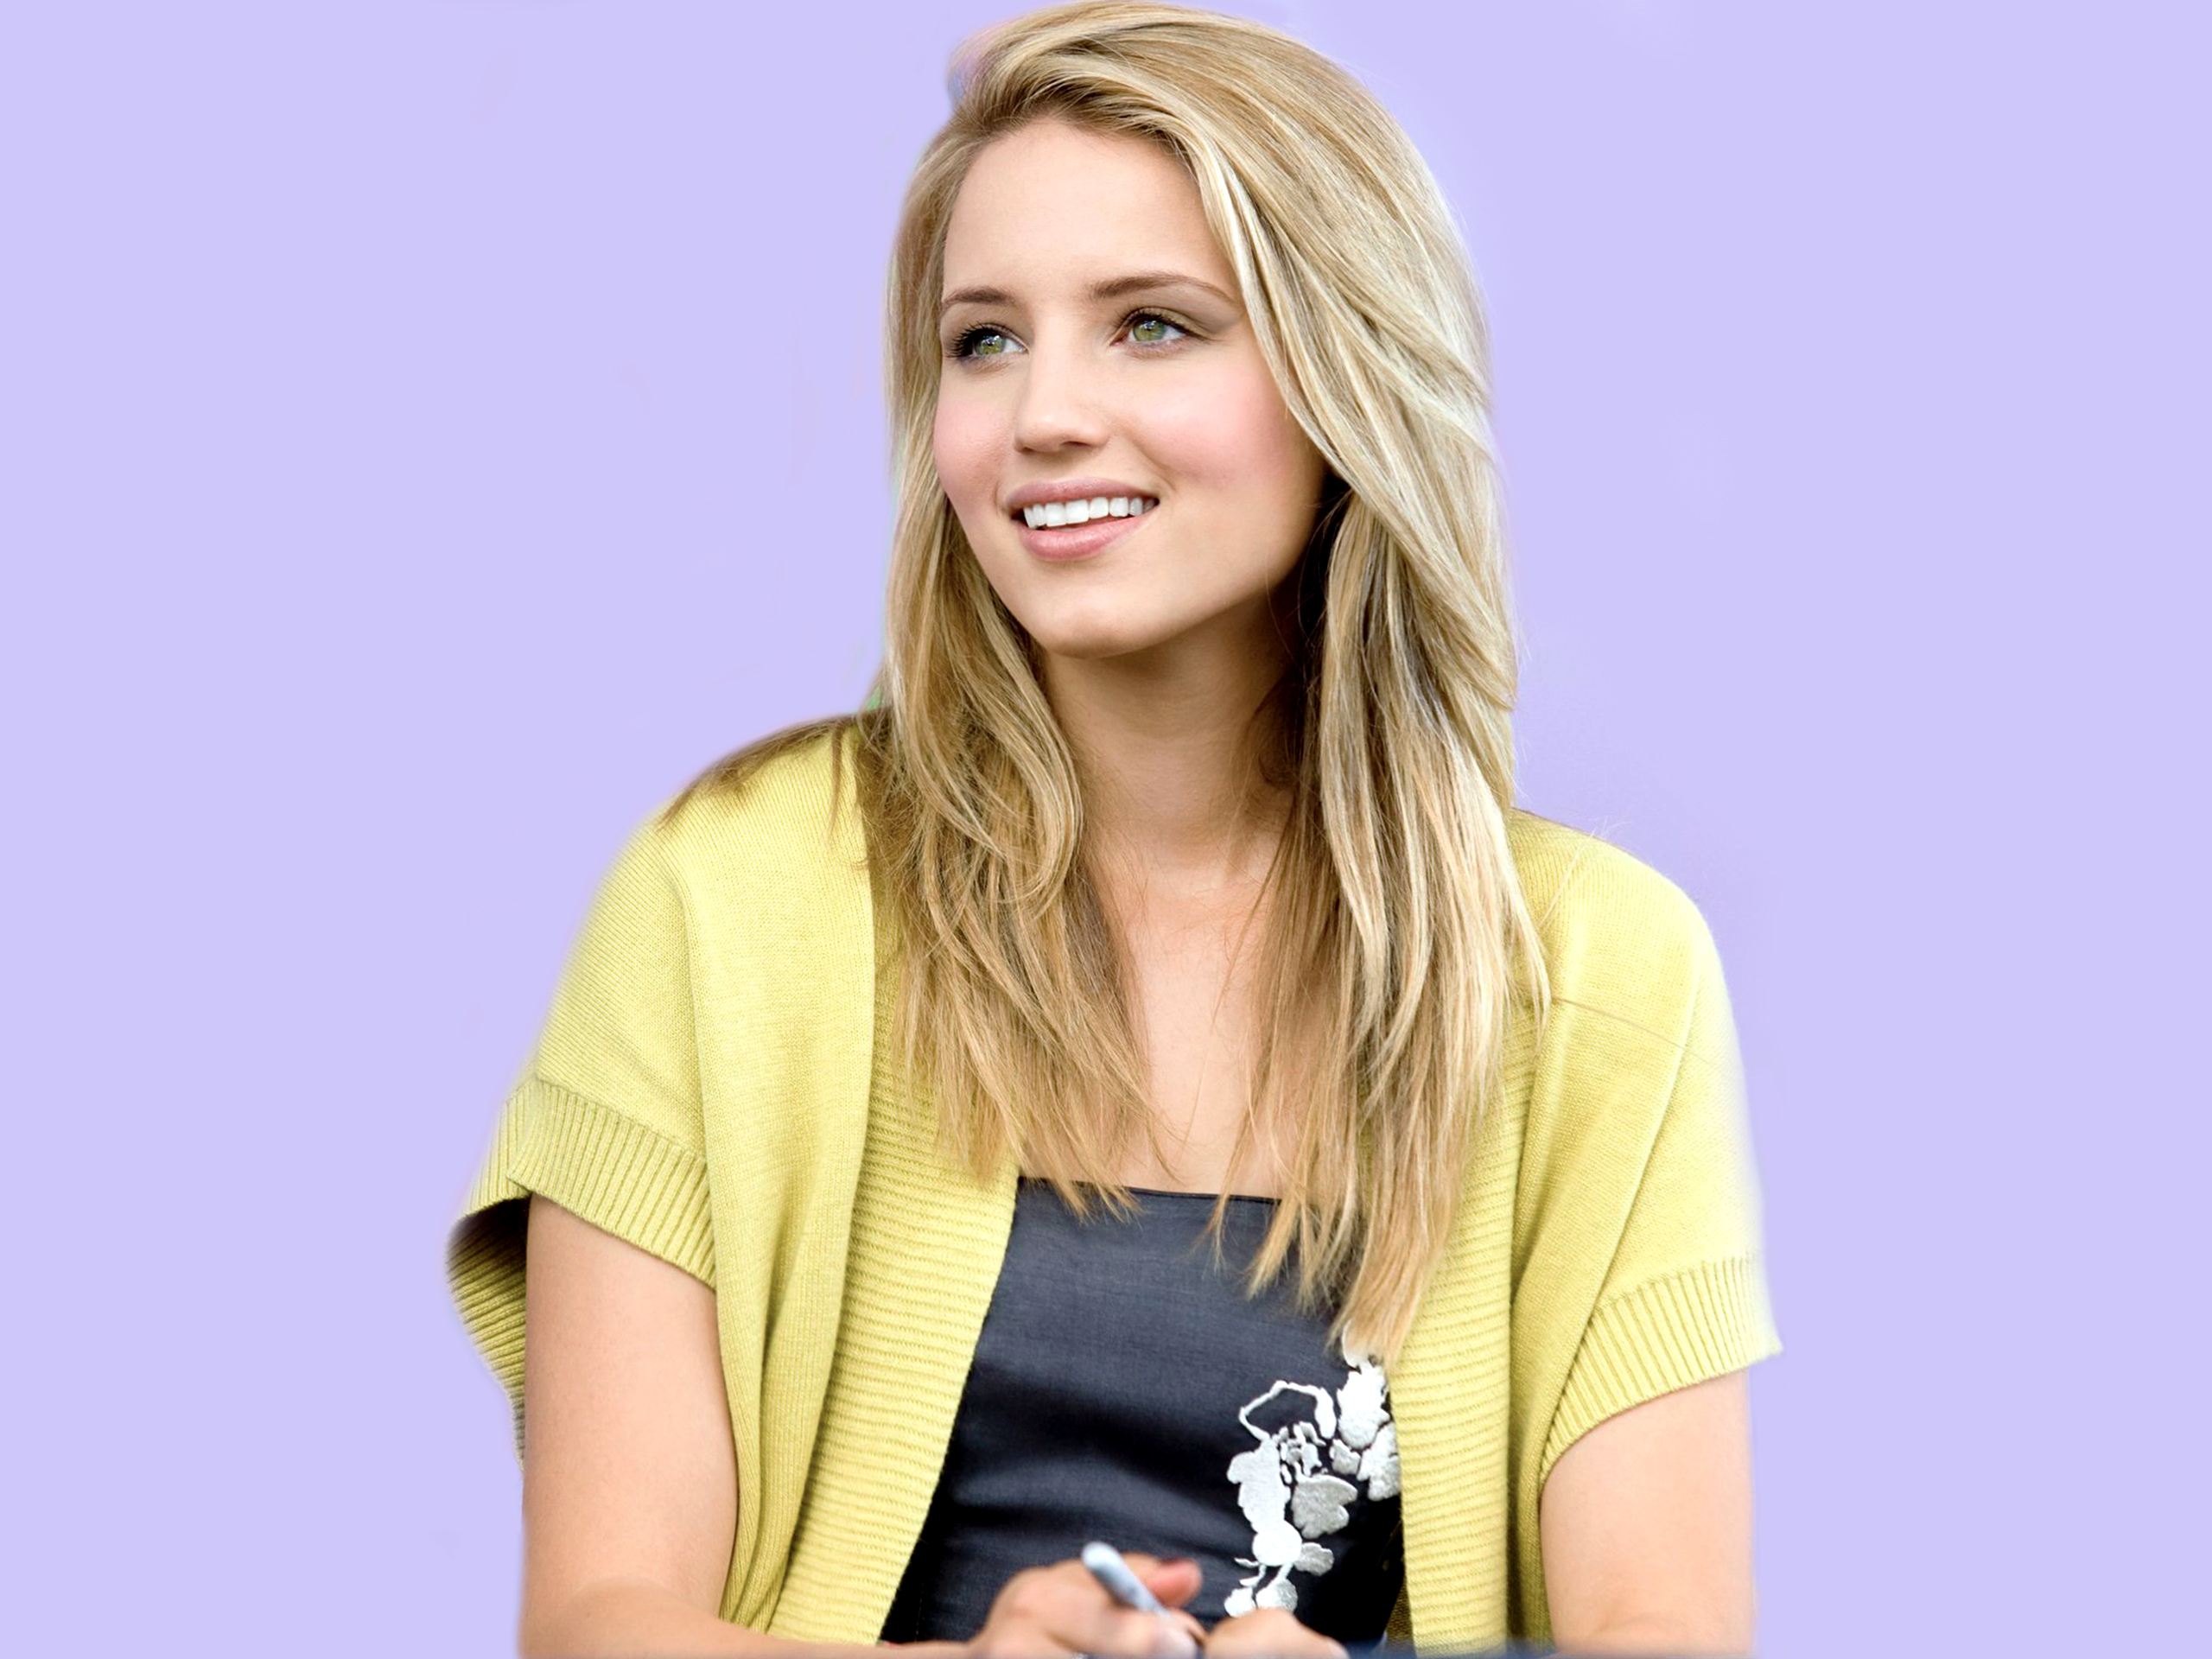 Dianna Agron Wallpapers High Resolution and Quality Download